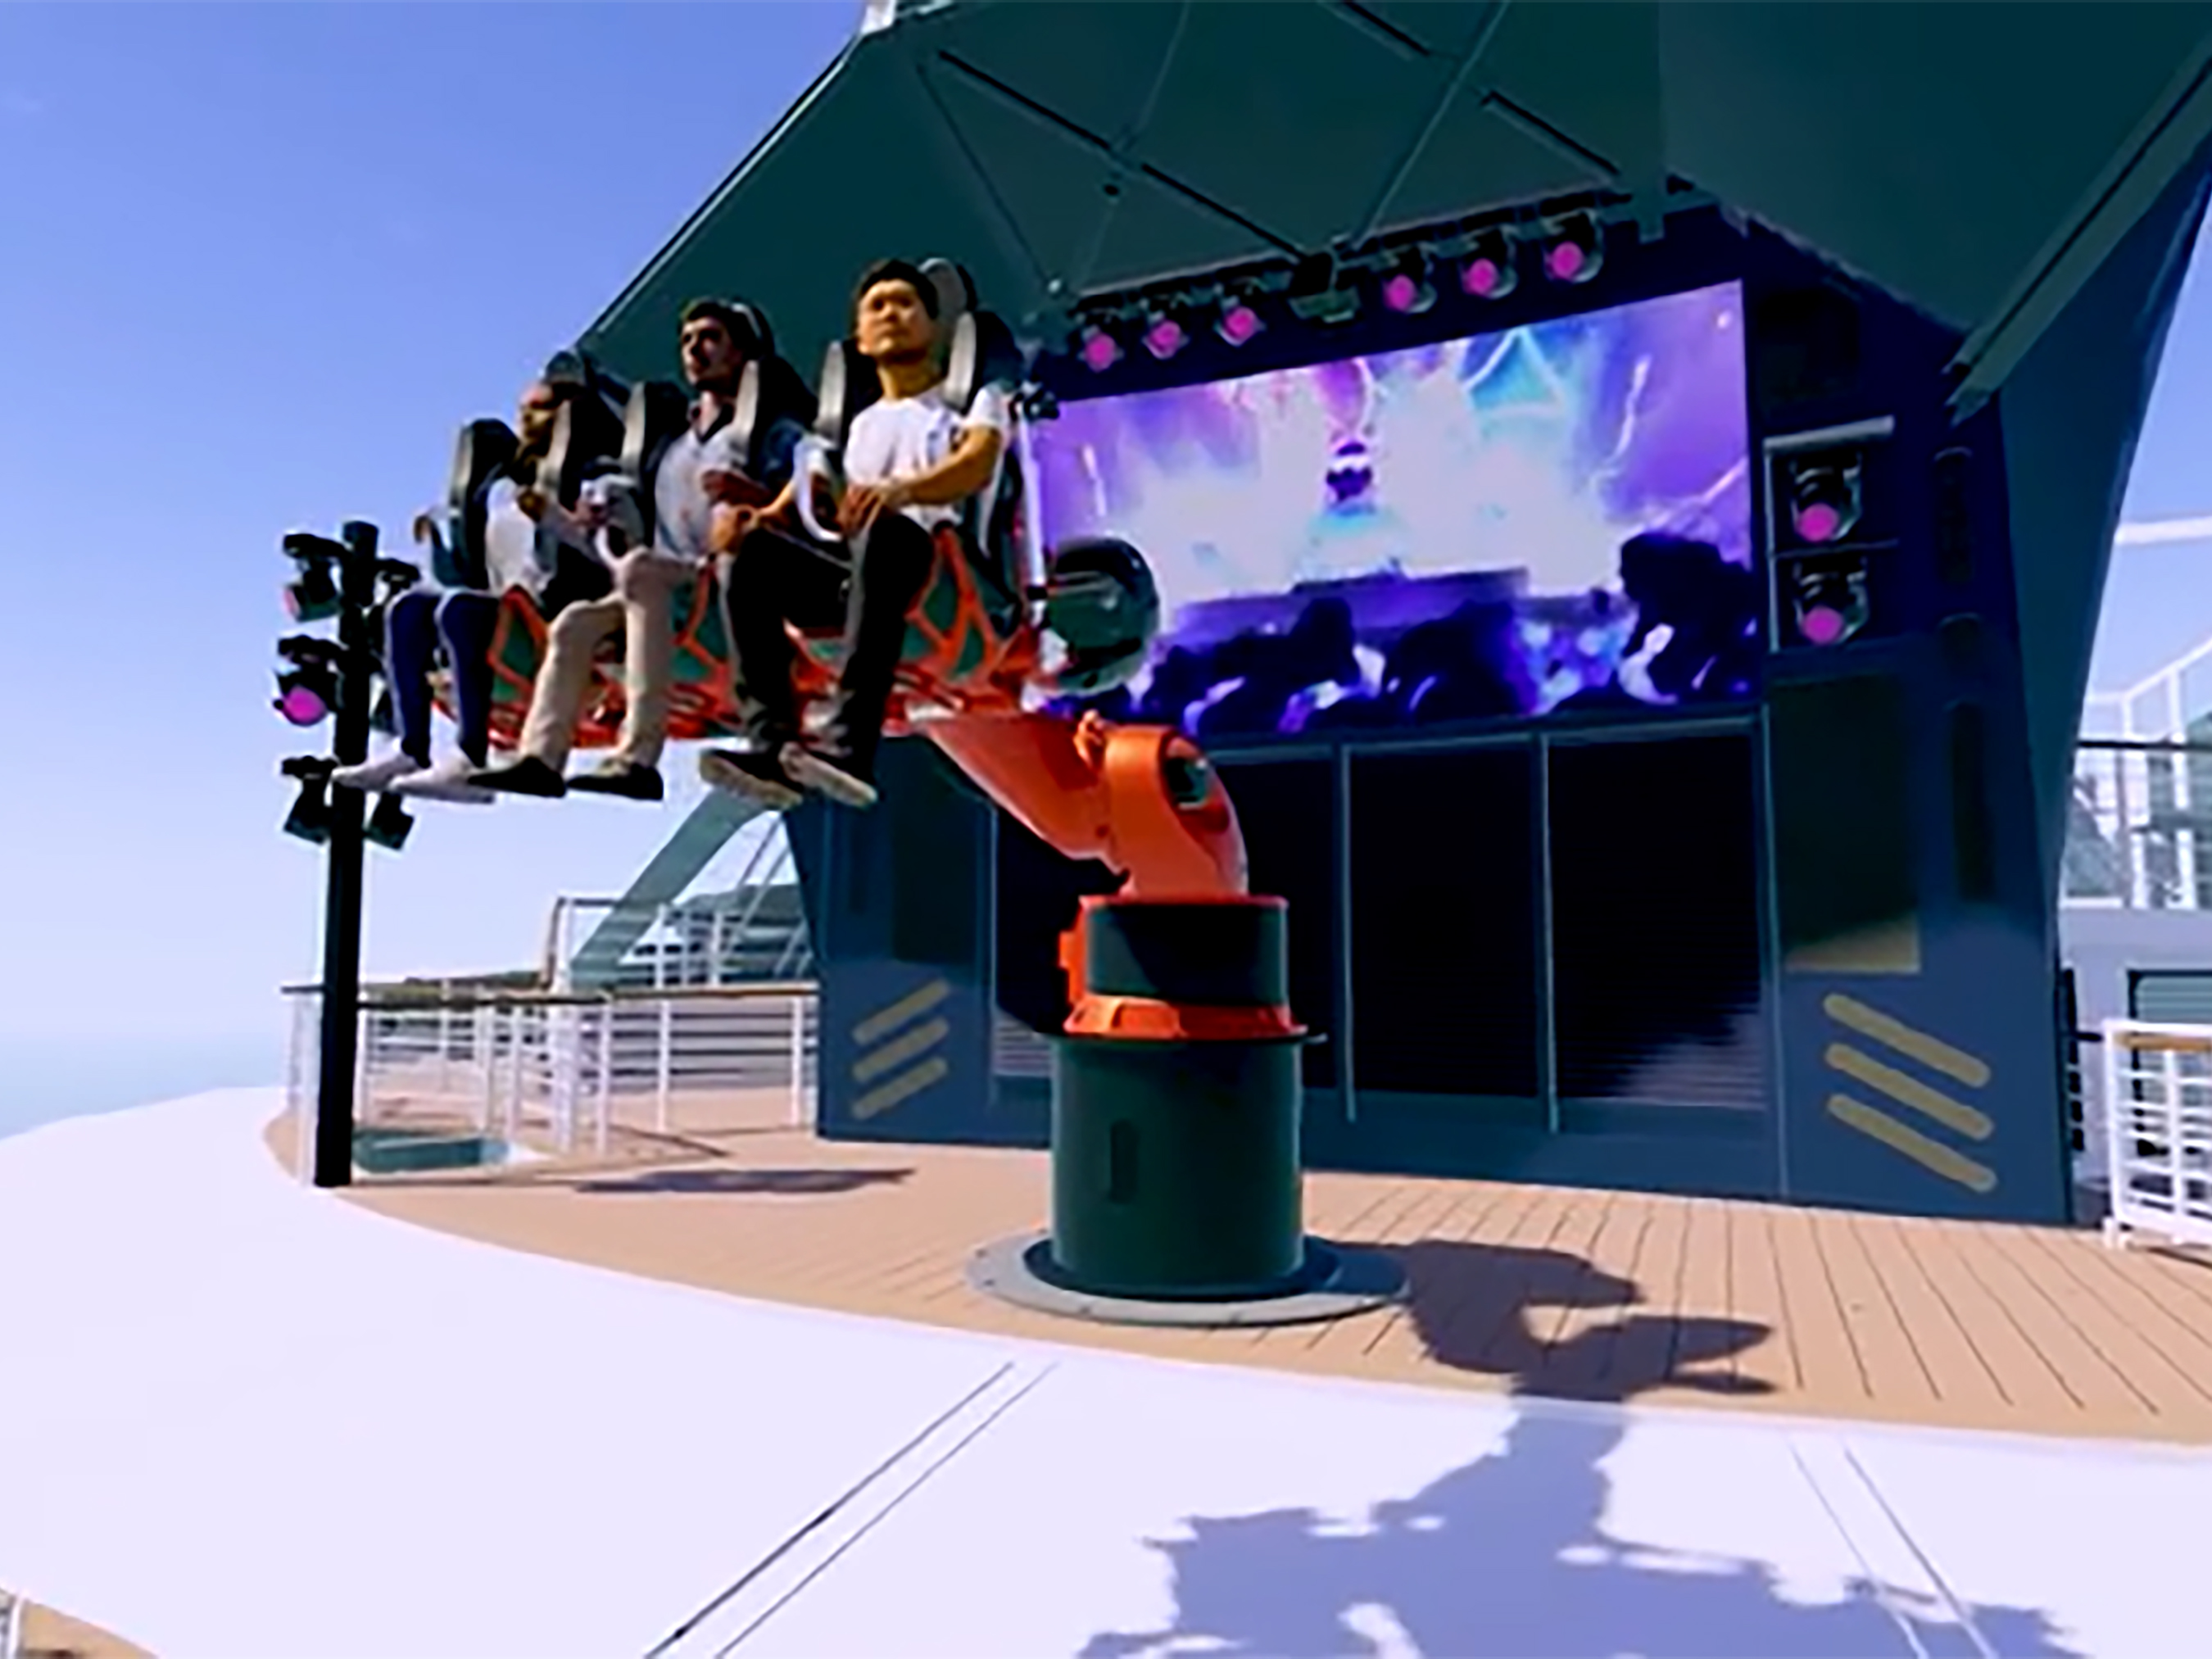 For the first time in a robotic arm ride, the Robotron Rider allows you to choose your preferred thrill level, from family-friendly to high-intensity.